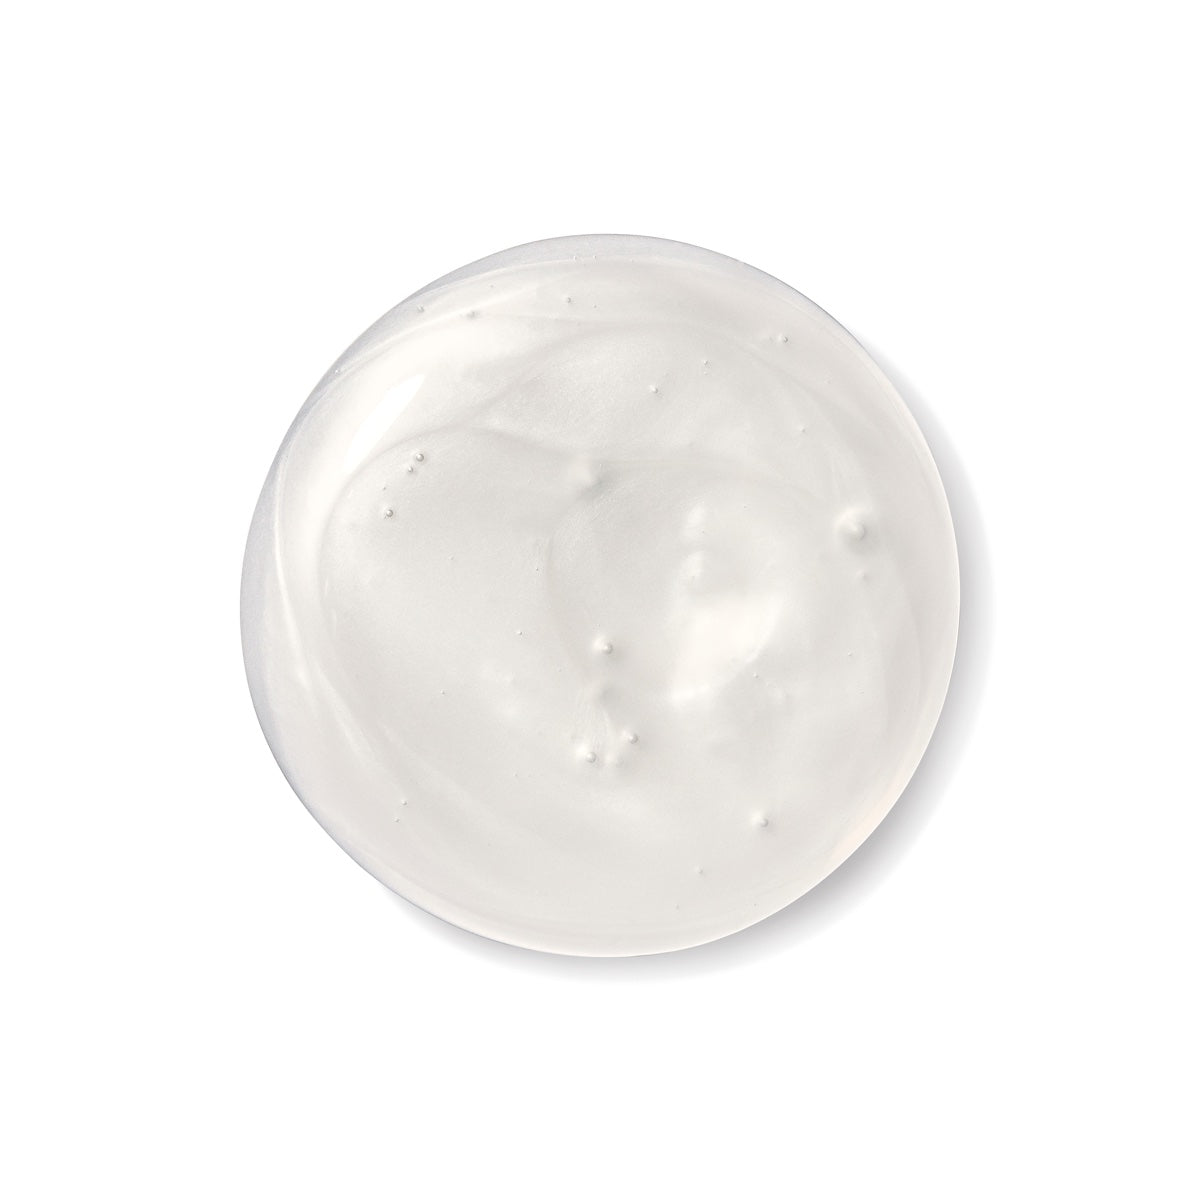 Large round white droplet Clarify salicylic acid acne facial cleanser Dermal Essentials Medical Grade Skincare